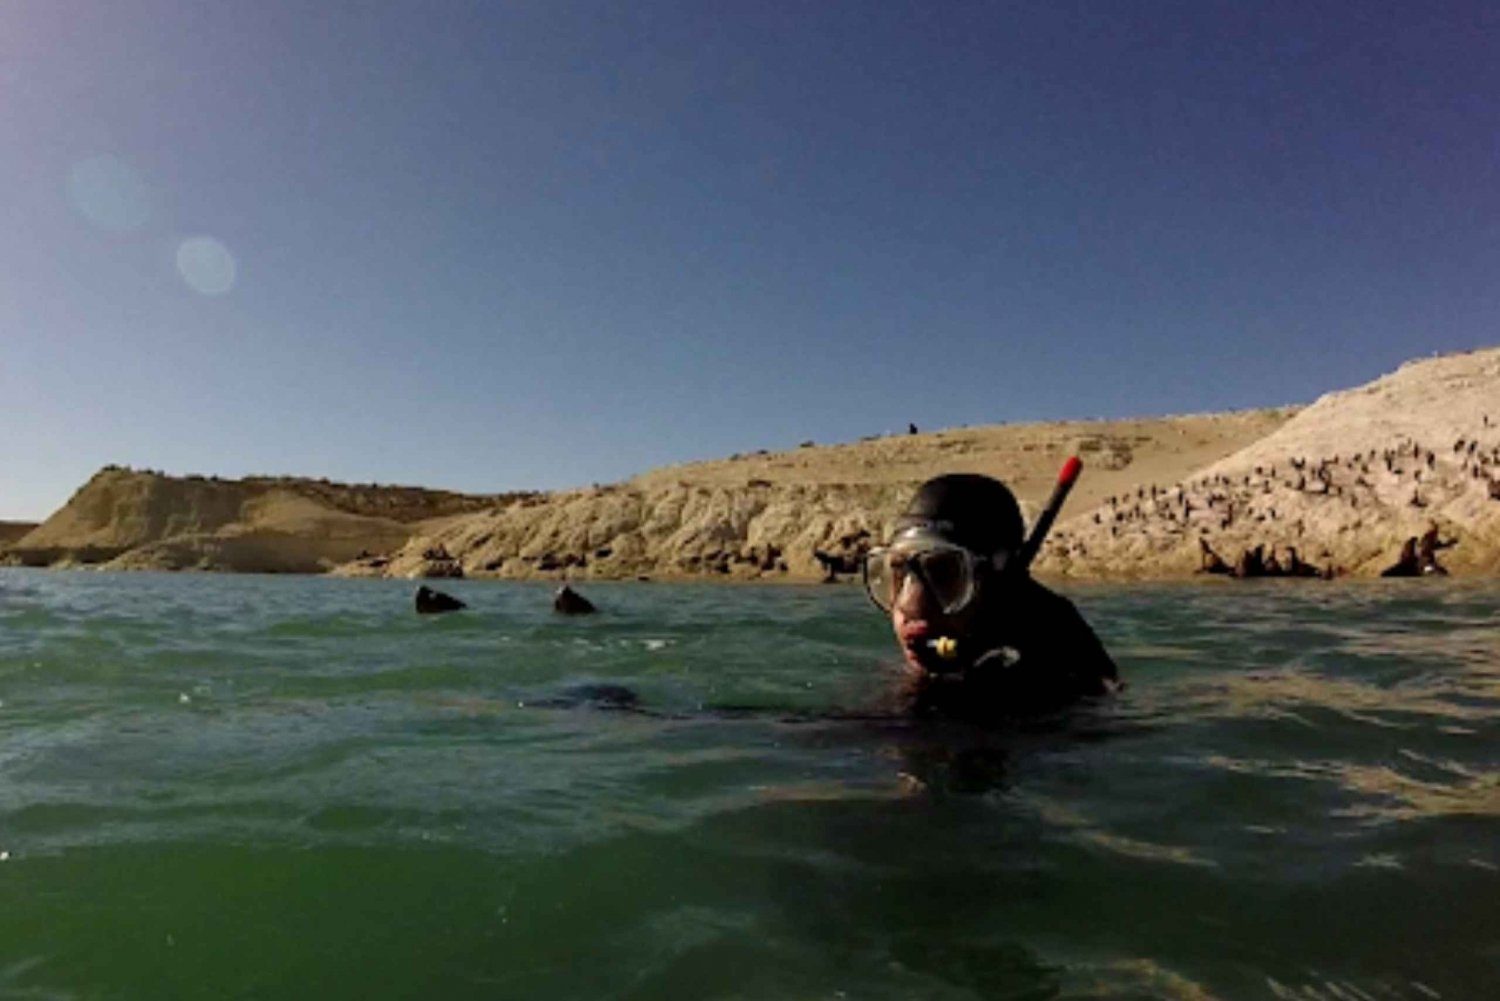 Puerto Madryn: Snorkeling with sea lions